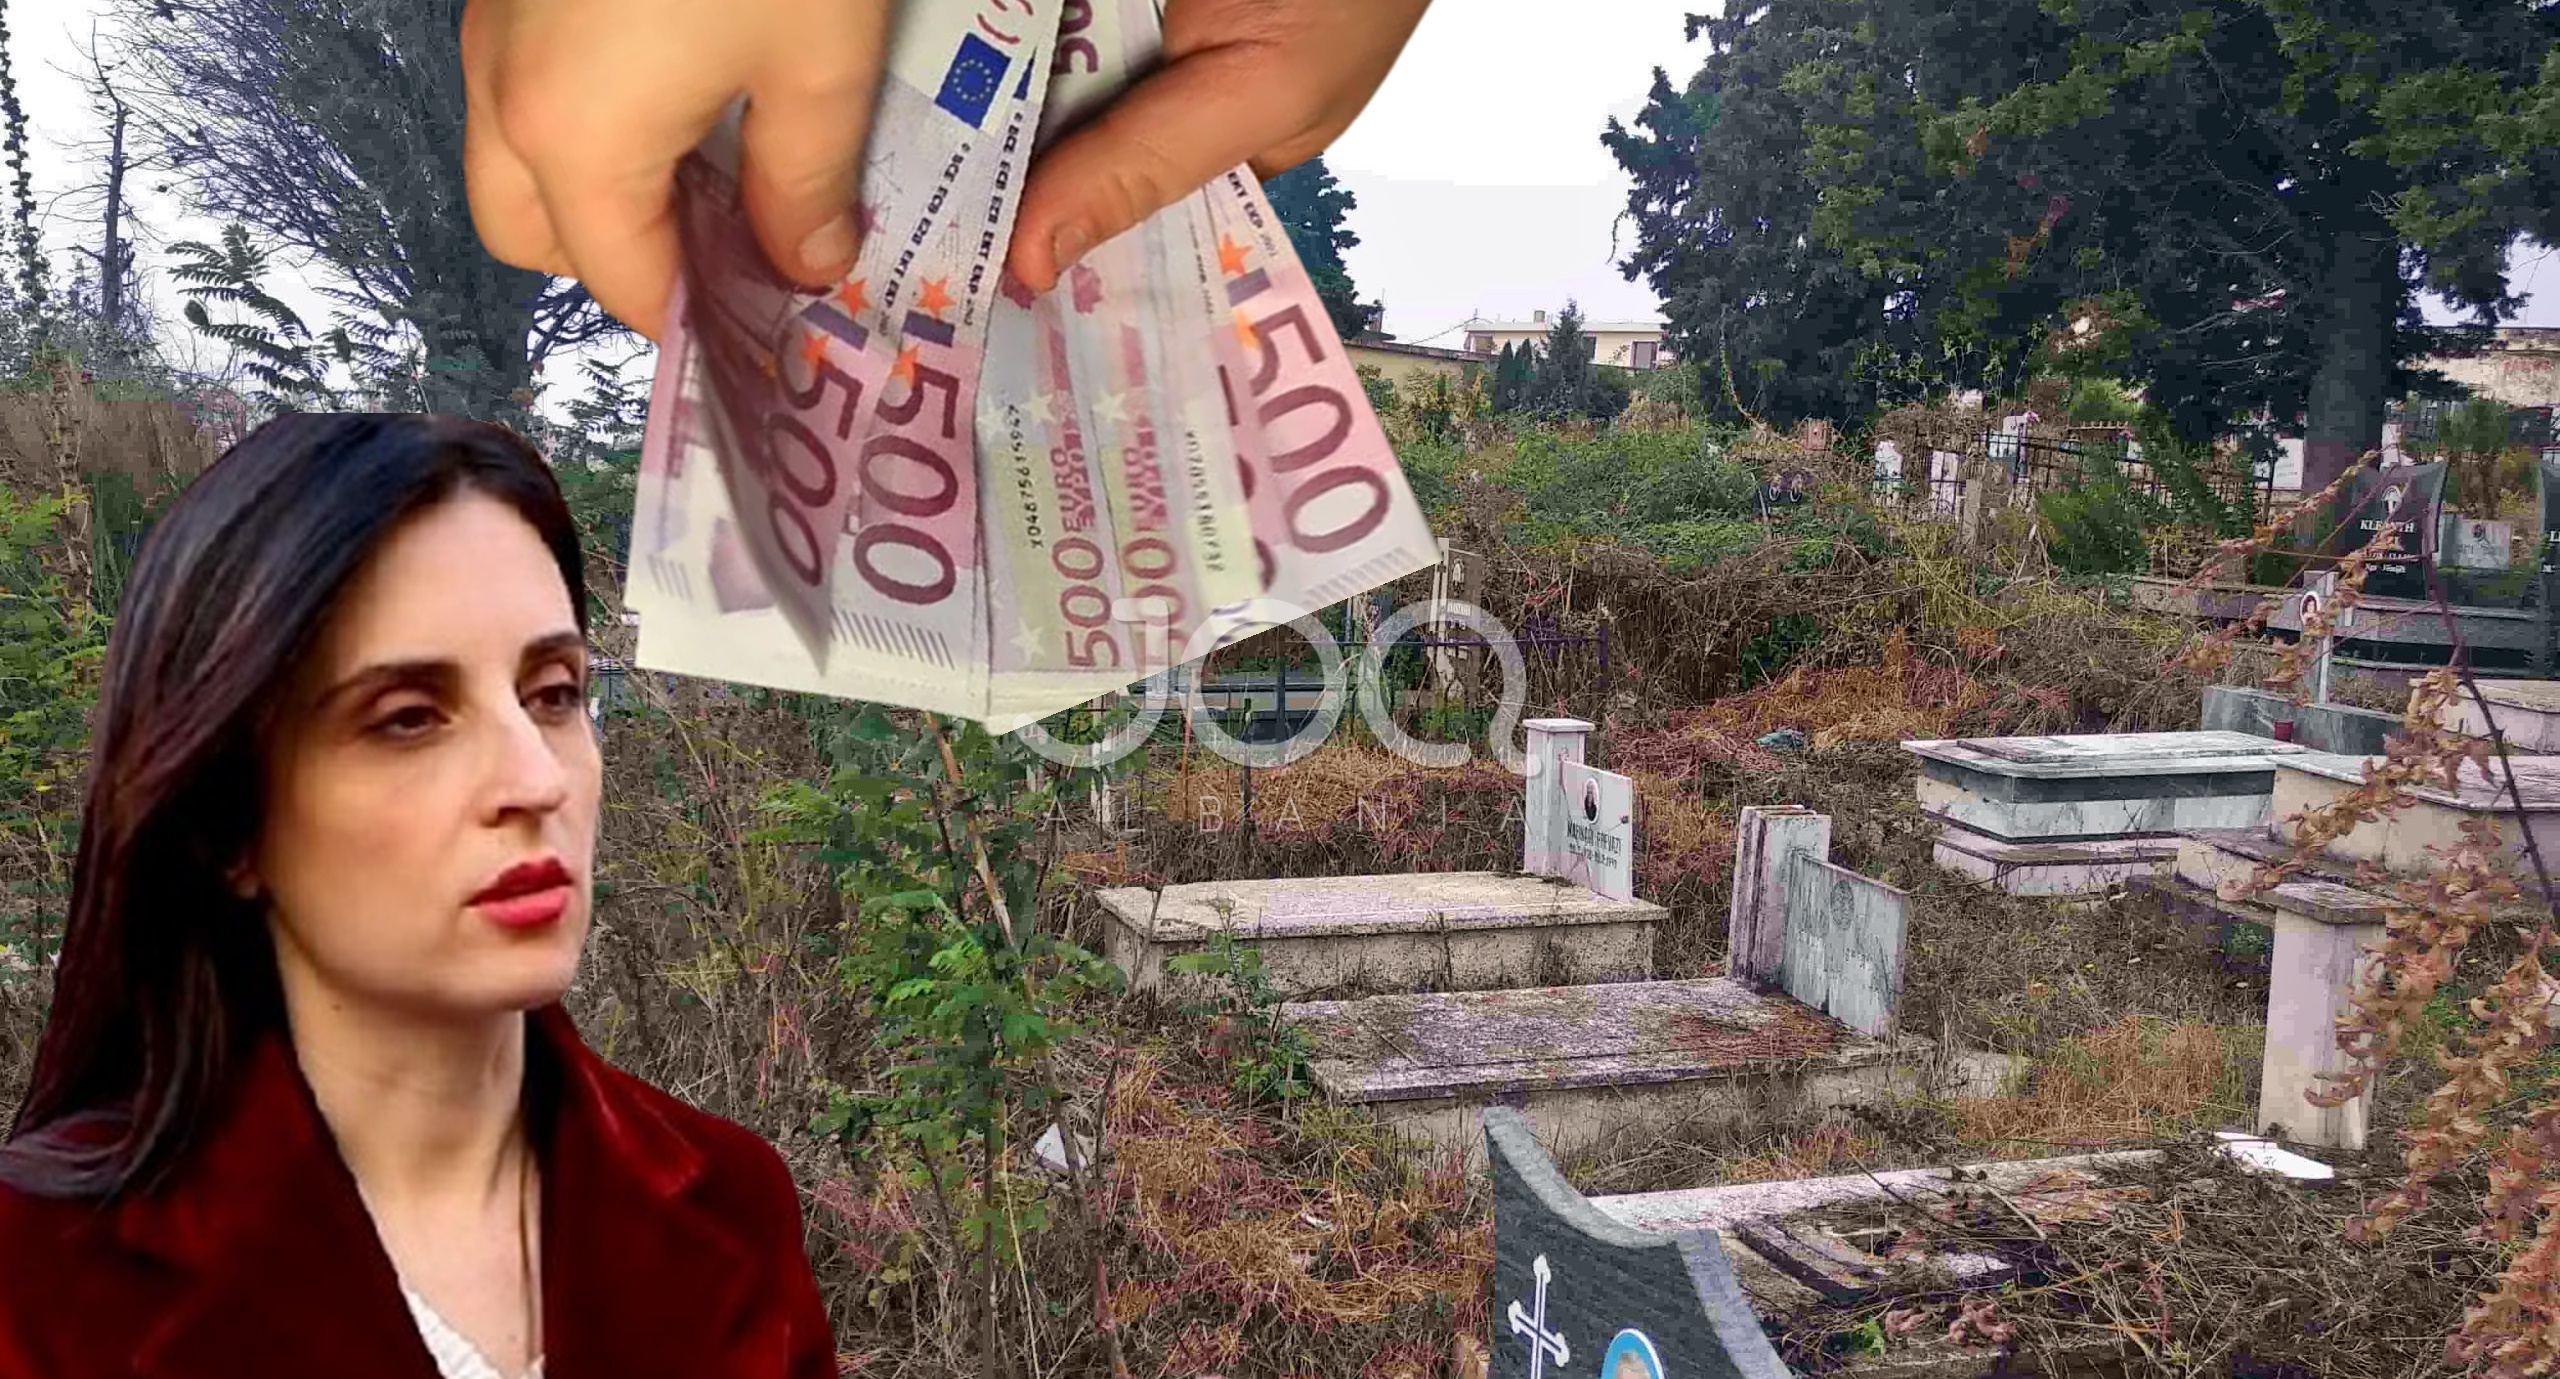 Emiriana Sako steals also the dead, 200 million without competition for the Durrës cemetery